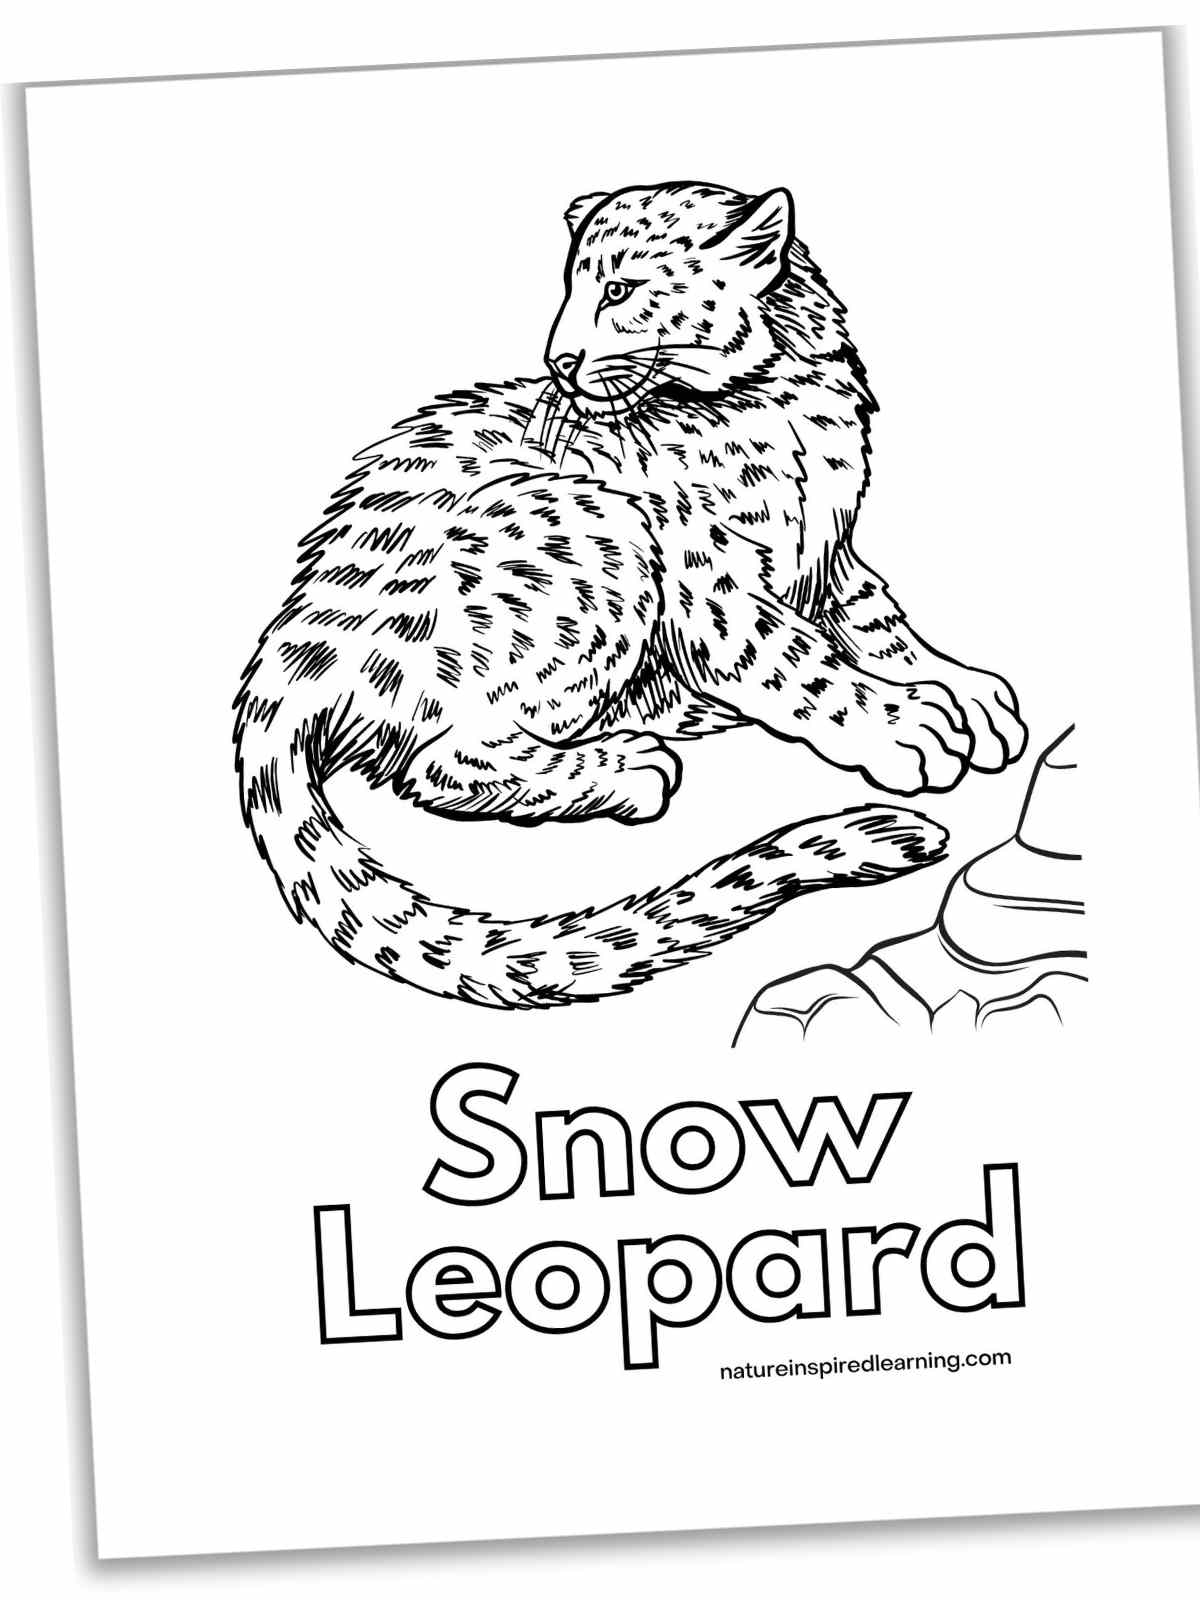 Black and white printable with a snow leopard laying down next to a rock with the text Snow Leopard below in a large font.